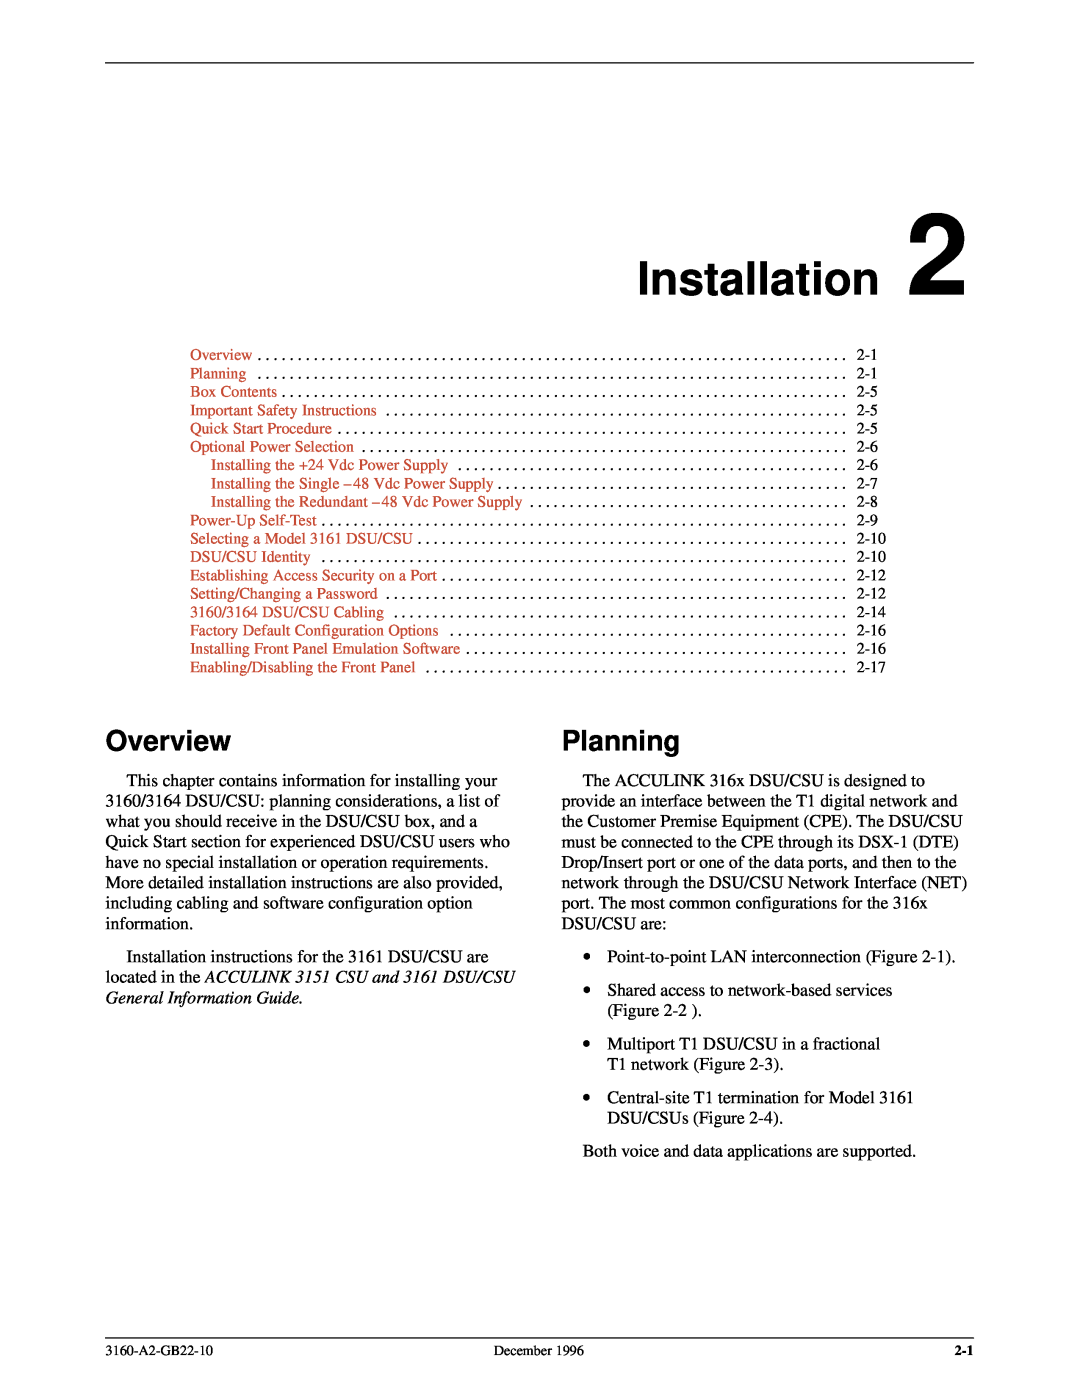 Paradyne 316x manual Installation, Planning, Overview 